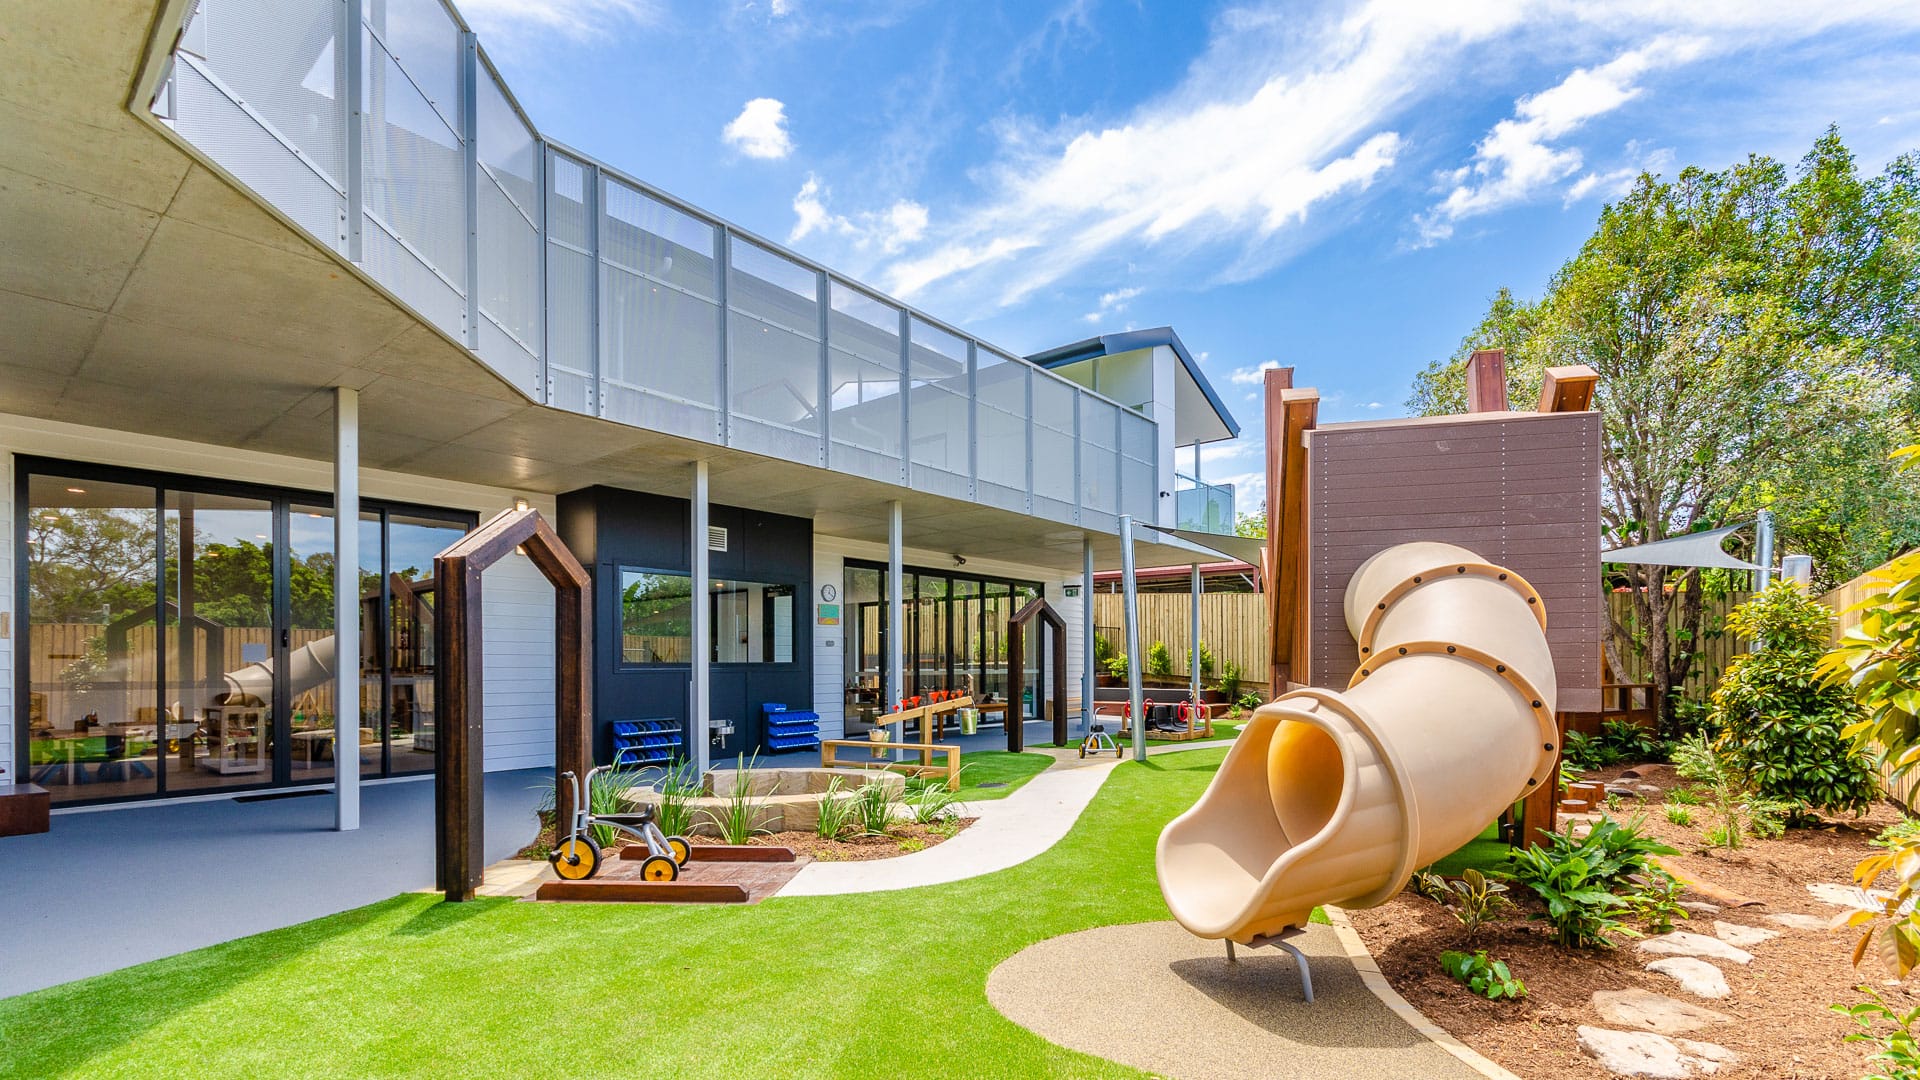 Little & Co. Early Education Childcare Centre by 77 Architecture. Copyright of 77 Architecture. Exterior playground at childcare centre. Multi-level building to left of image. Slide and garden to right. 